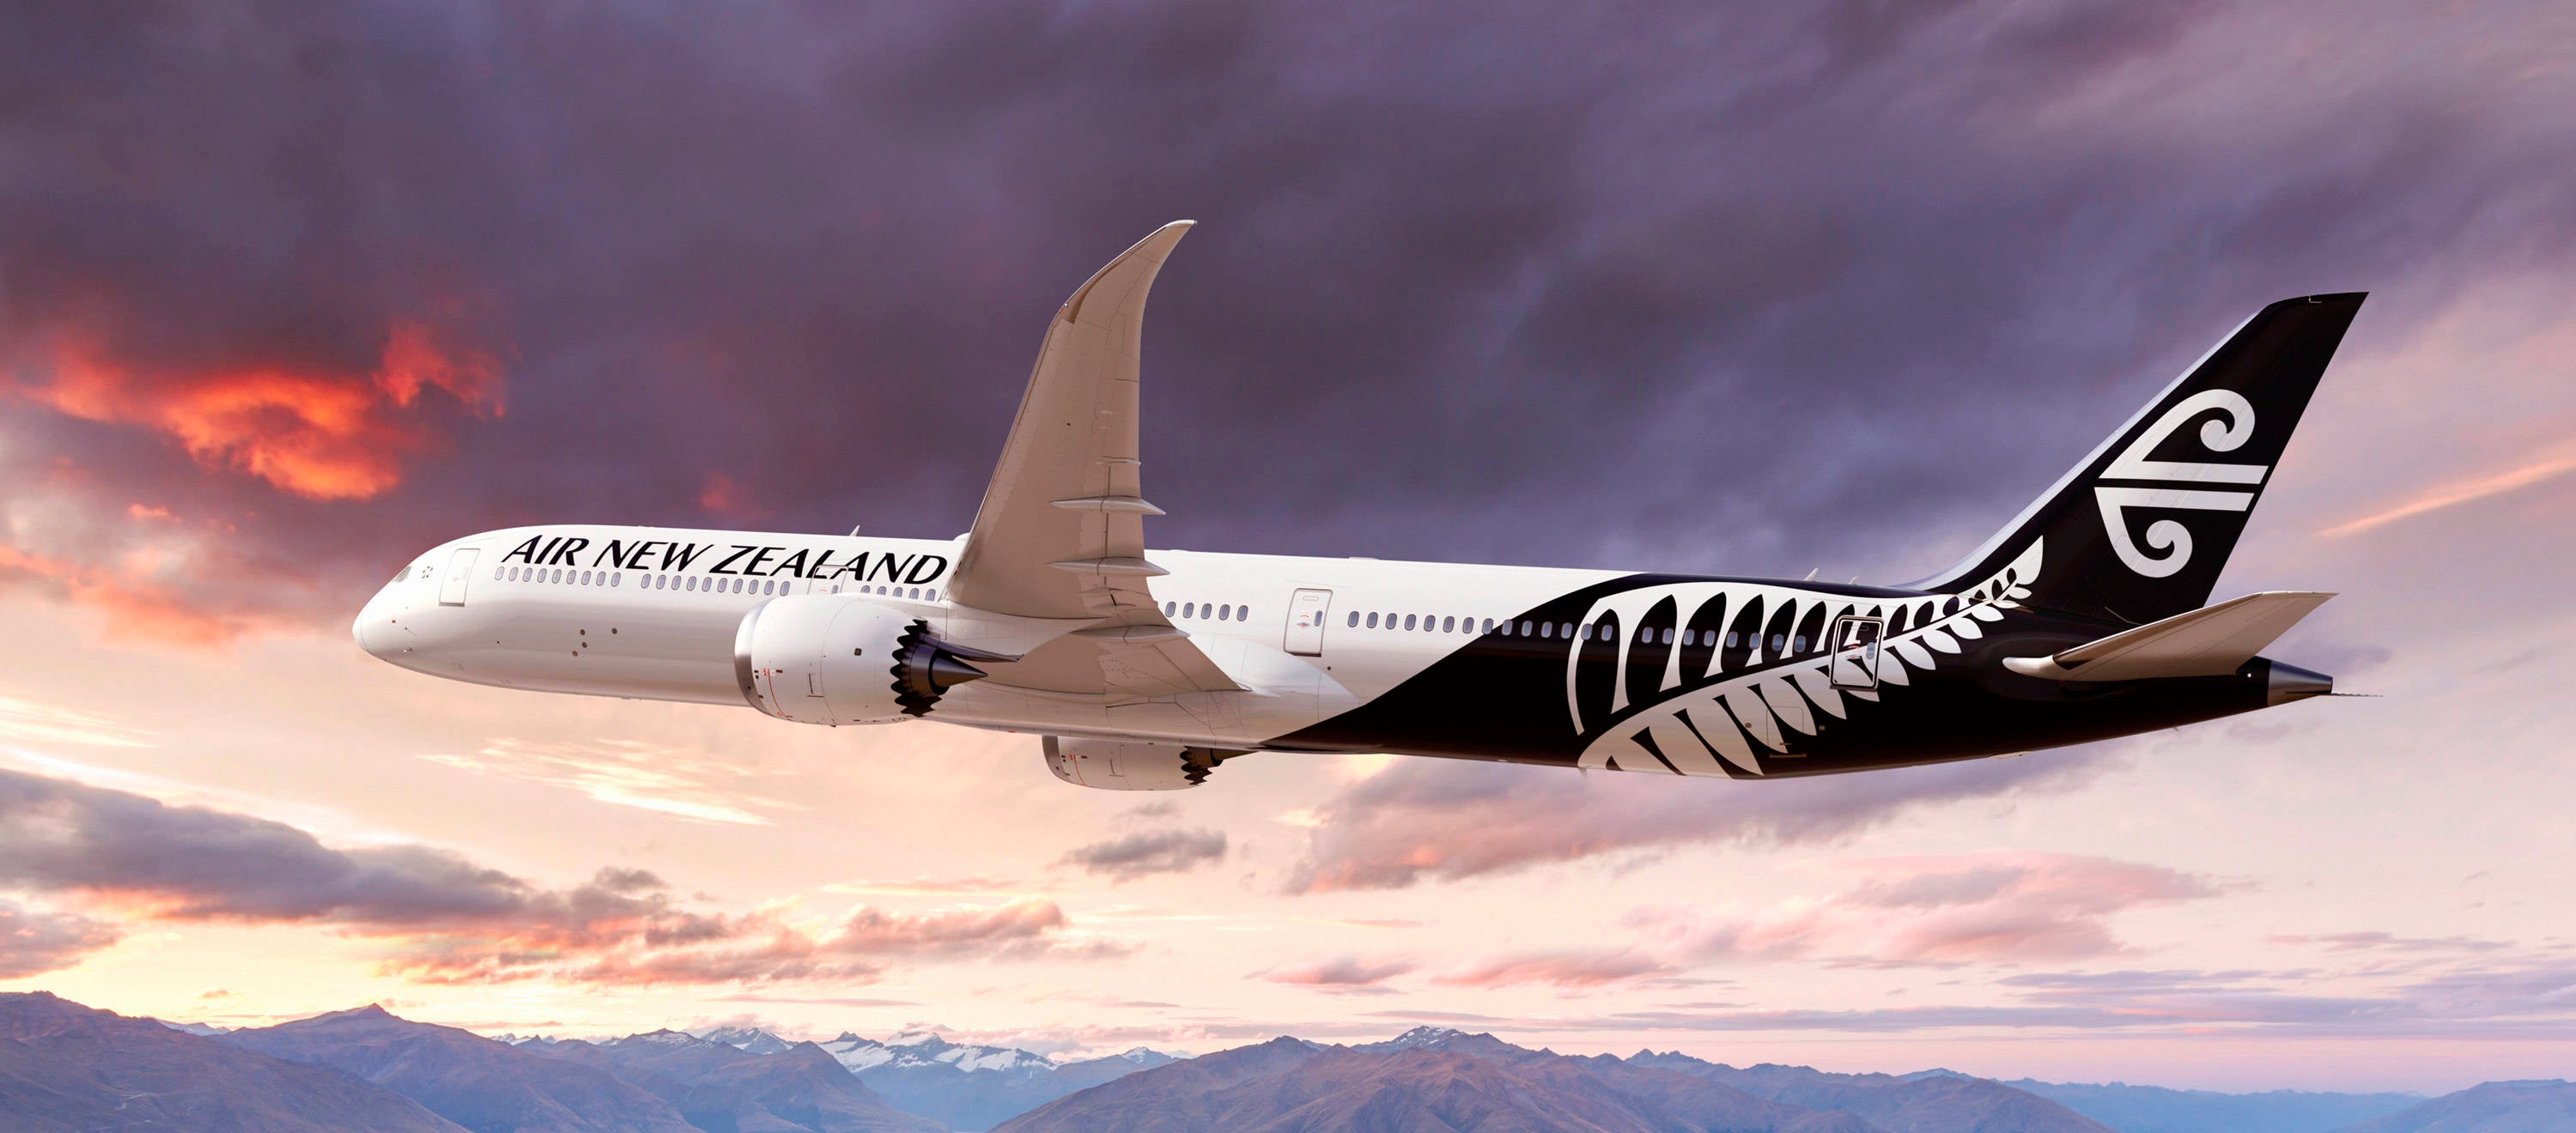 Air New Zealand has yet to announce their new business class seat but when the product makes its debut, it will likely be aboard the airline's Boeing 787-10. (Image via Boeing)